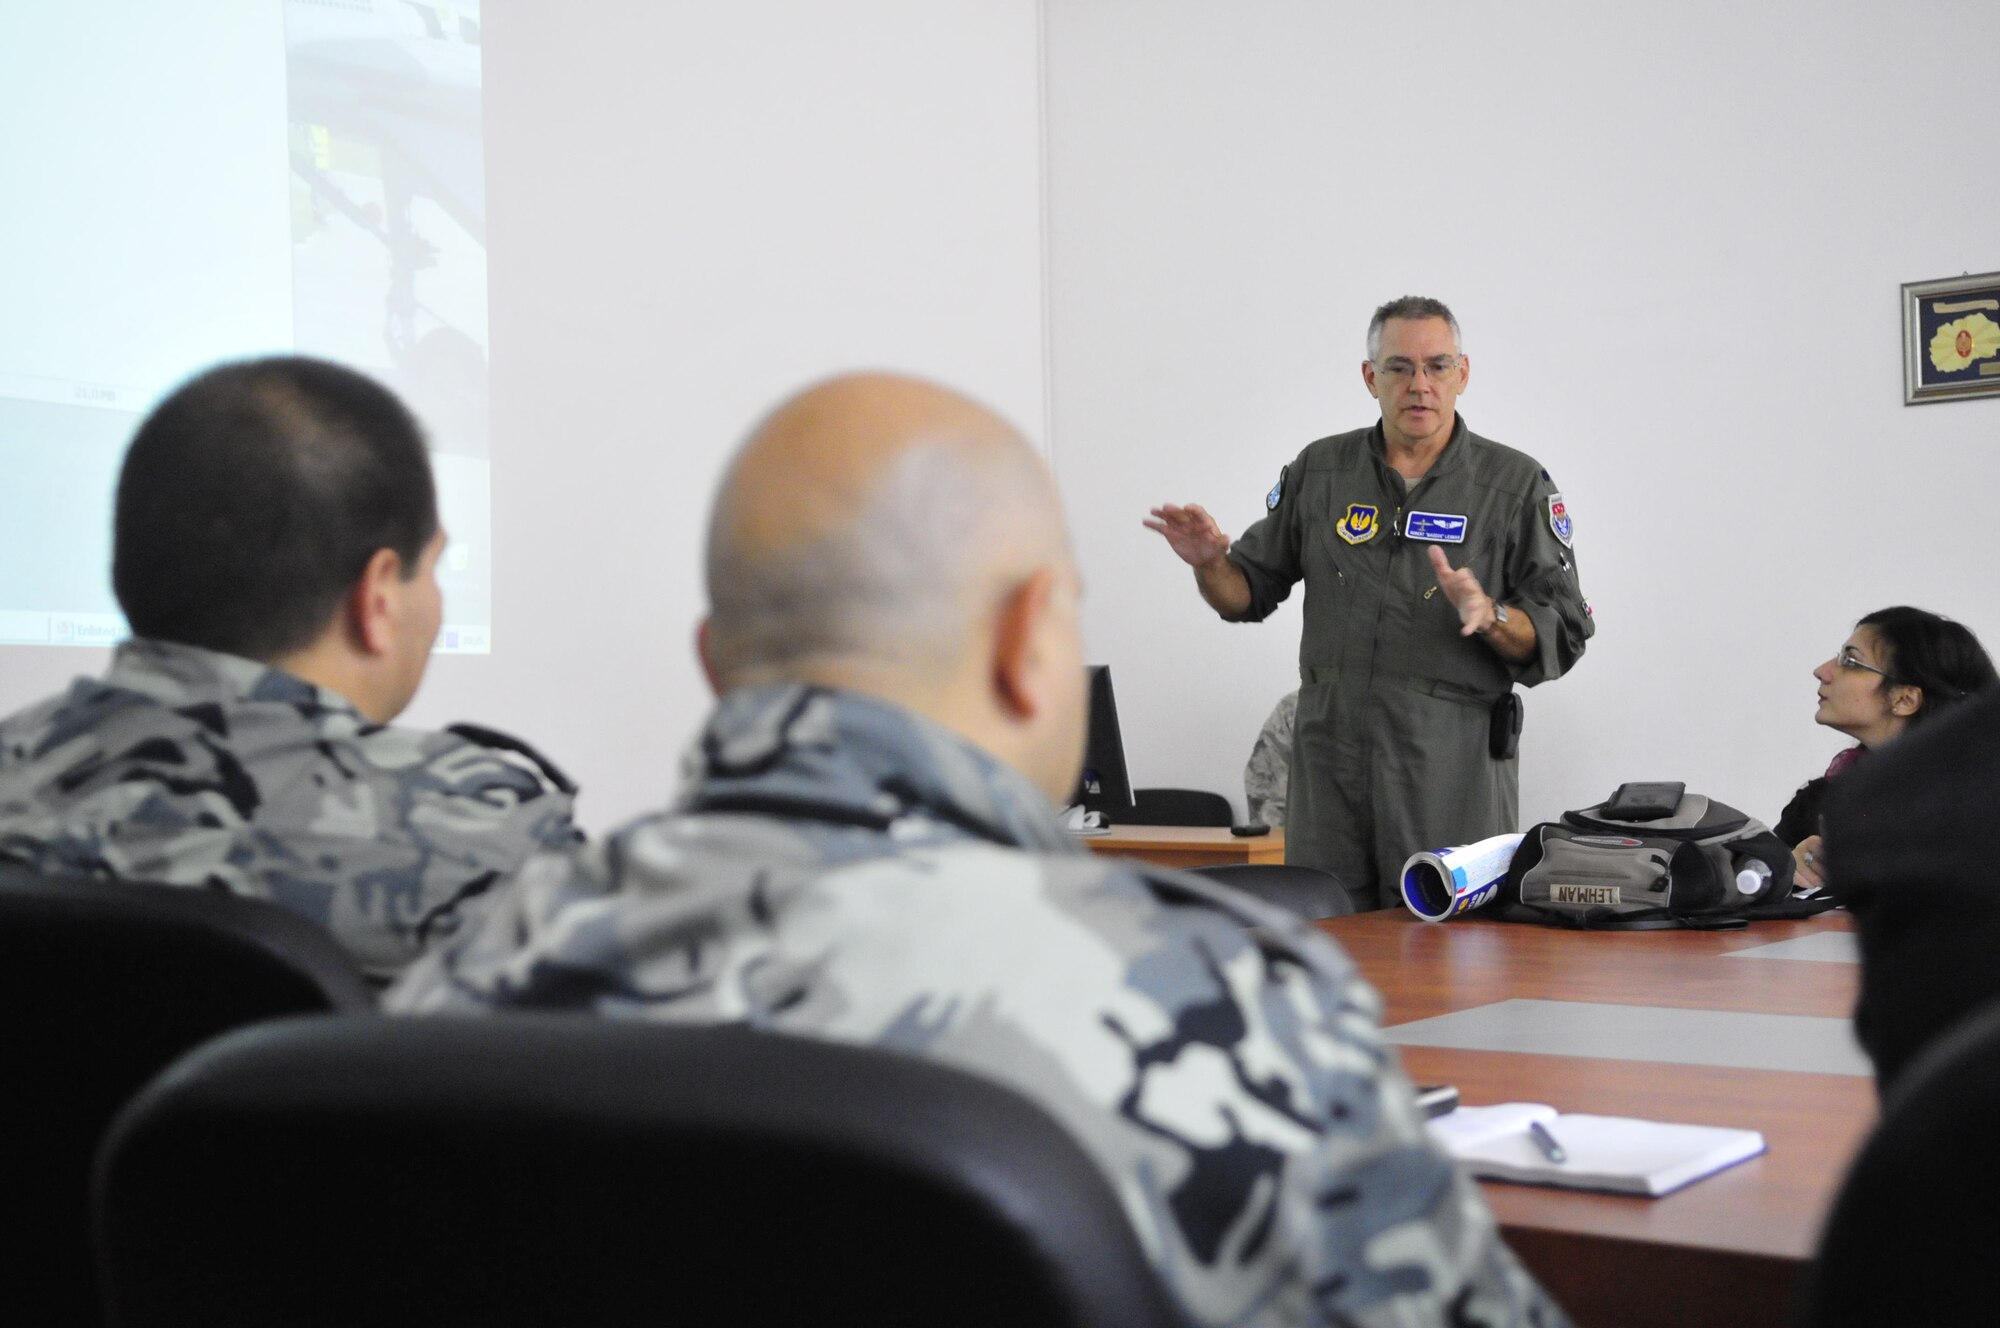 Lt. Col. Robert Lehman, 86th Medical Squadron flight surgeon, briefs medical professionals from the Bulgarian Air Force during a round-table discussion on the history and future of flight medicine, Oct. 19 at Graf Ignatievo Air Base, Bulgaria. Airmen from the 86th Airlift Wing and 435th Air Ground Operations Wing at Ramstein Air Base, Germany joined airmen from throughout U.S. Air Forces in Europe in Plovdiv, Bulgaria, for Thracian Fall 2010, a week of on-site training designed to building the partnership between the U.S. and Bulgarian Air Force. (U.S. Air Force photo by Tech. Sgt. Michael Voss)